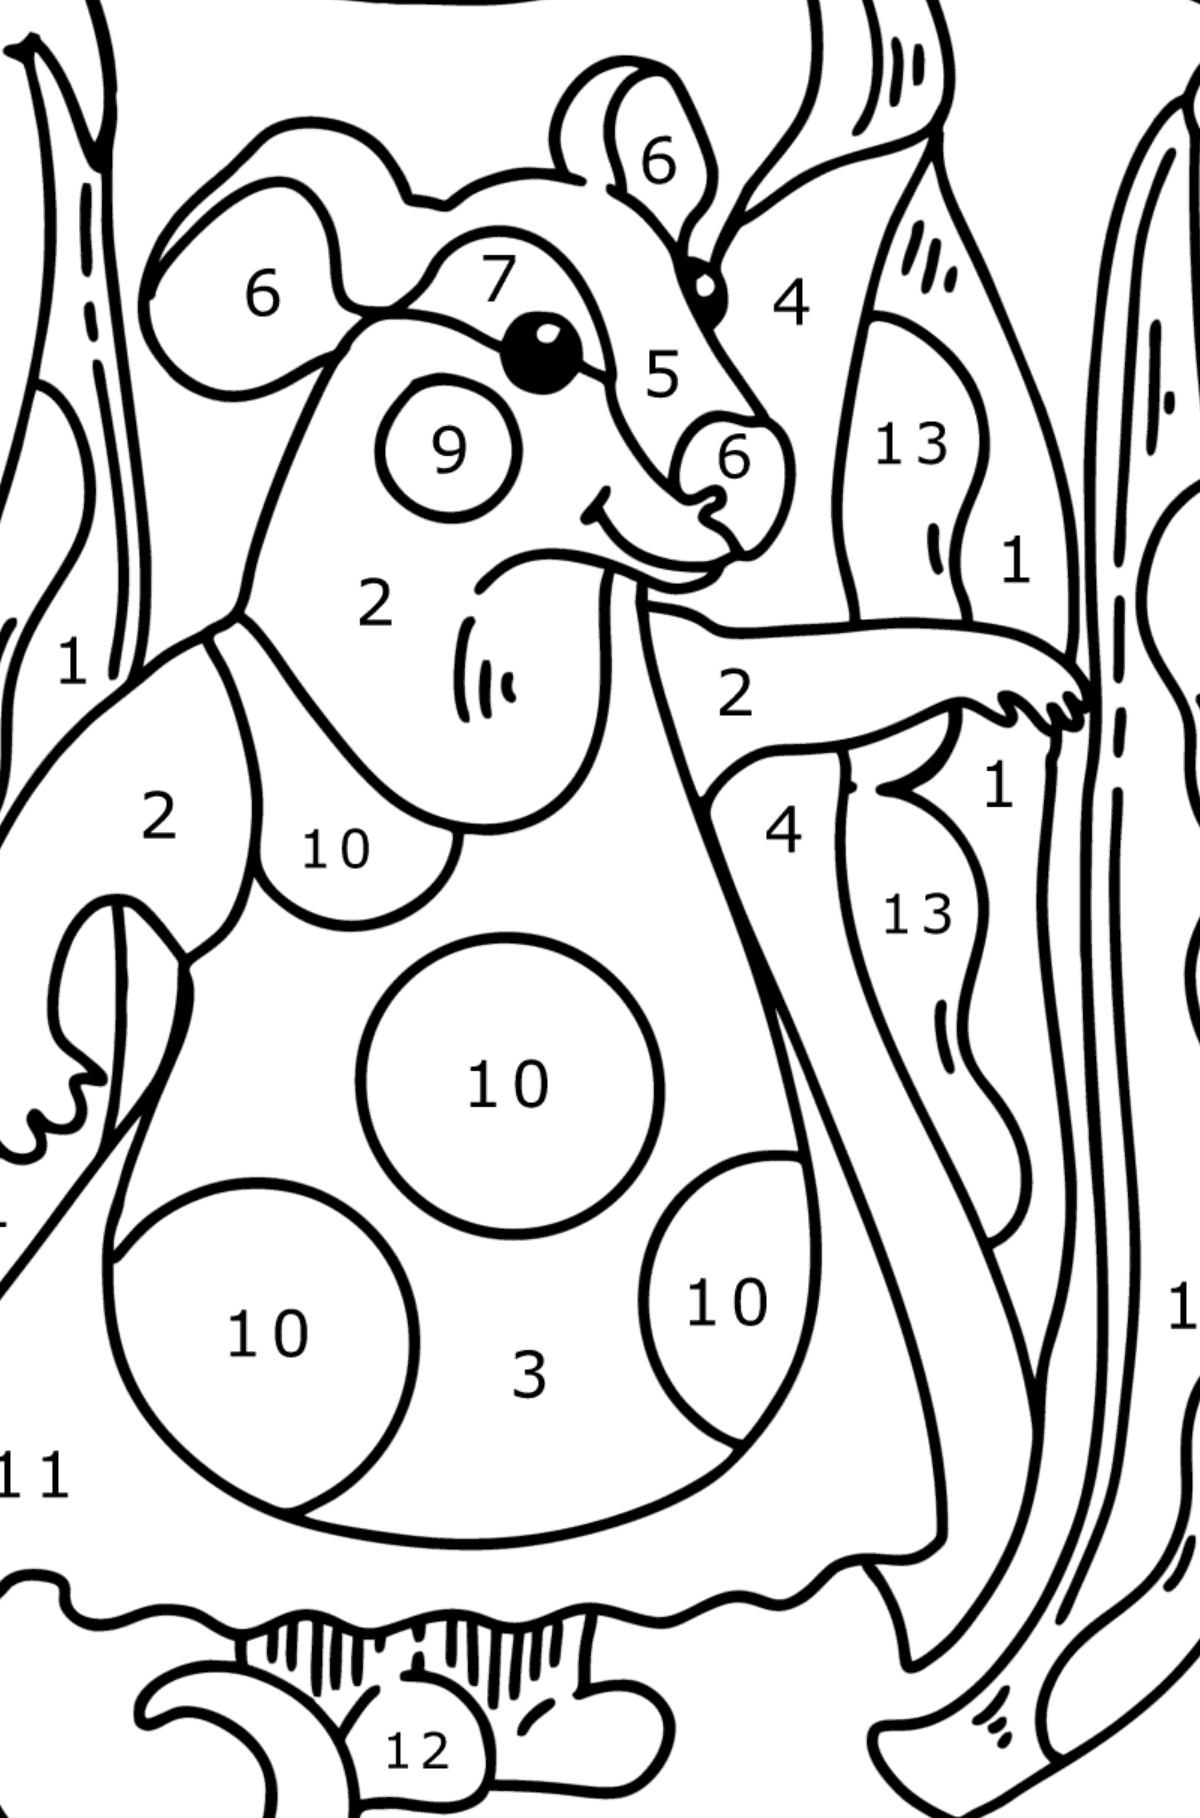 Coloring page - Cute Mouse - Coloring by Numbers for Kids